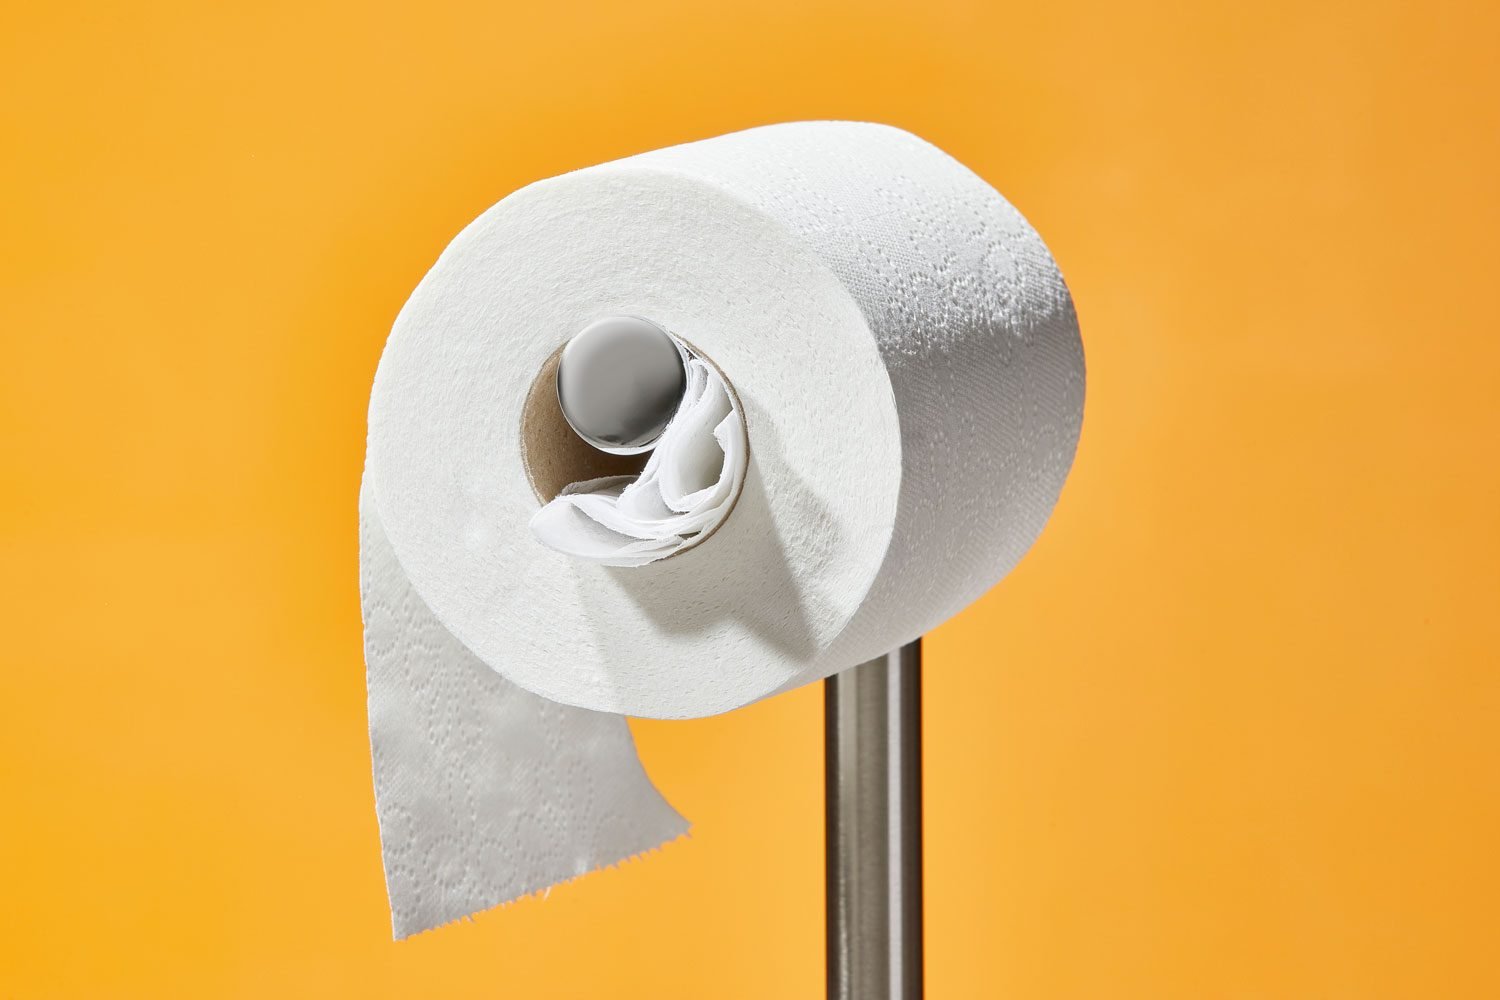 dryer sheet poking out of the cardboard roll of a toilet paper roll; orange background